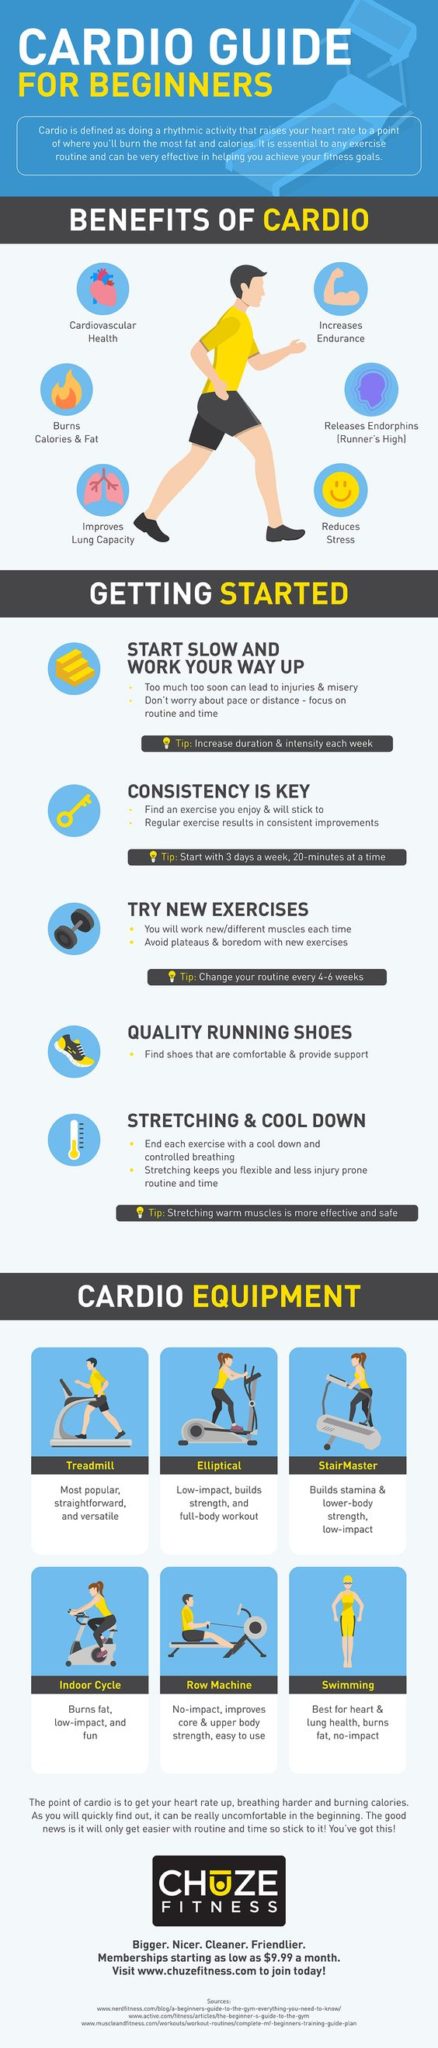 Cardio Guide for Beginners | Chuze Fitness